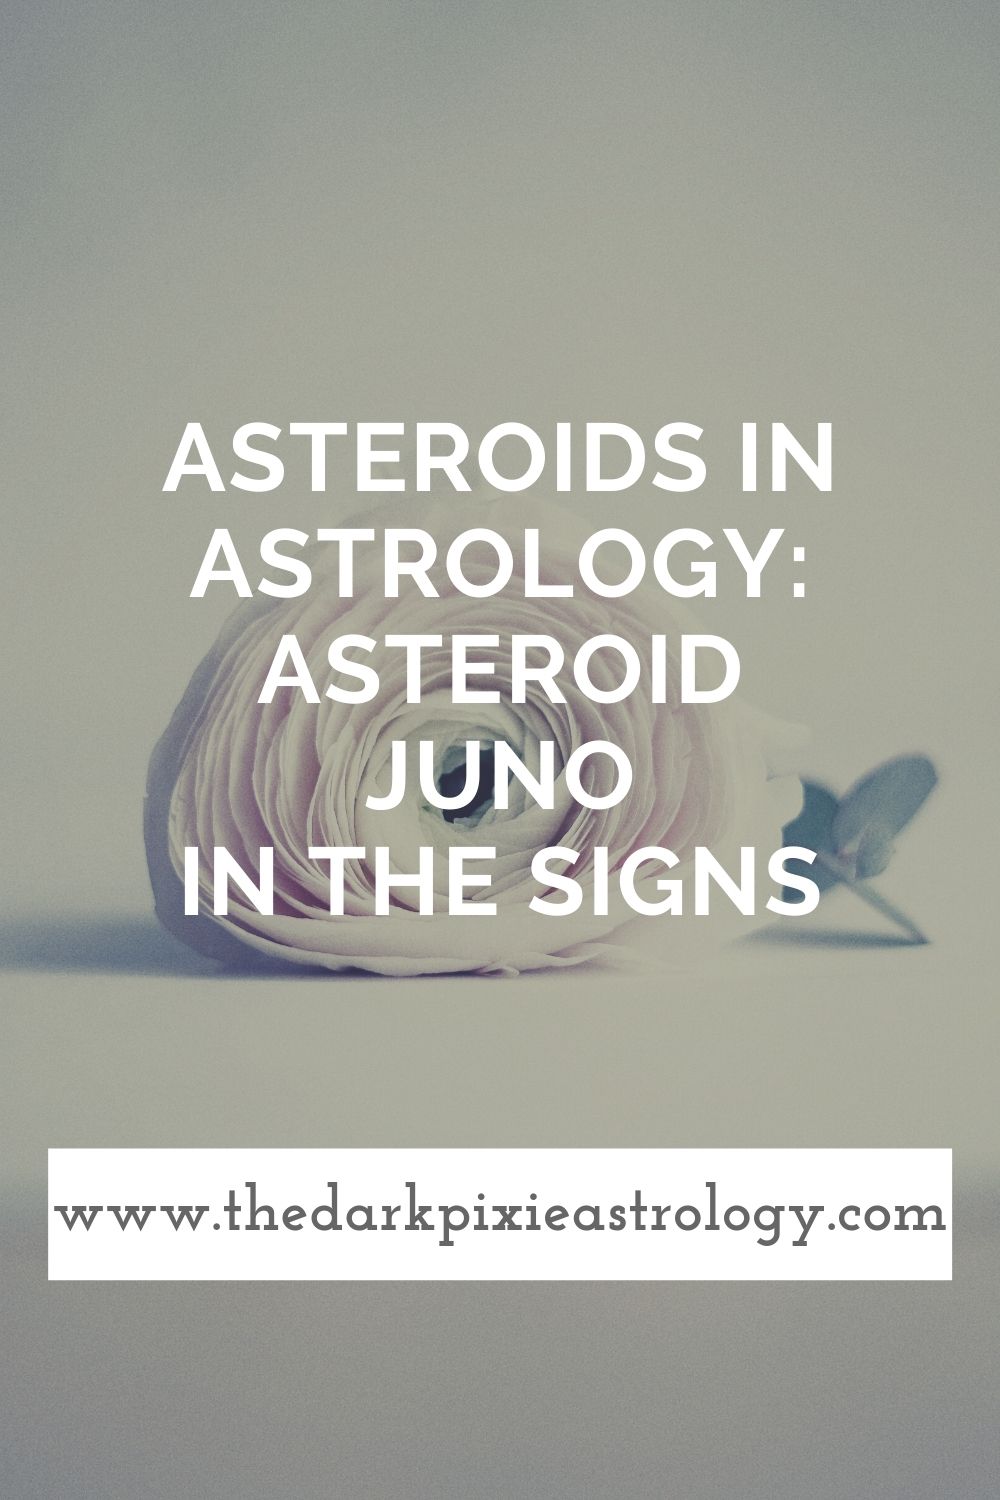 Asteroids in Astrology: Asteroid Juno in the Signs - The Dark Pixie Astrology